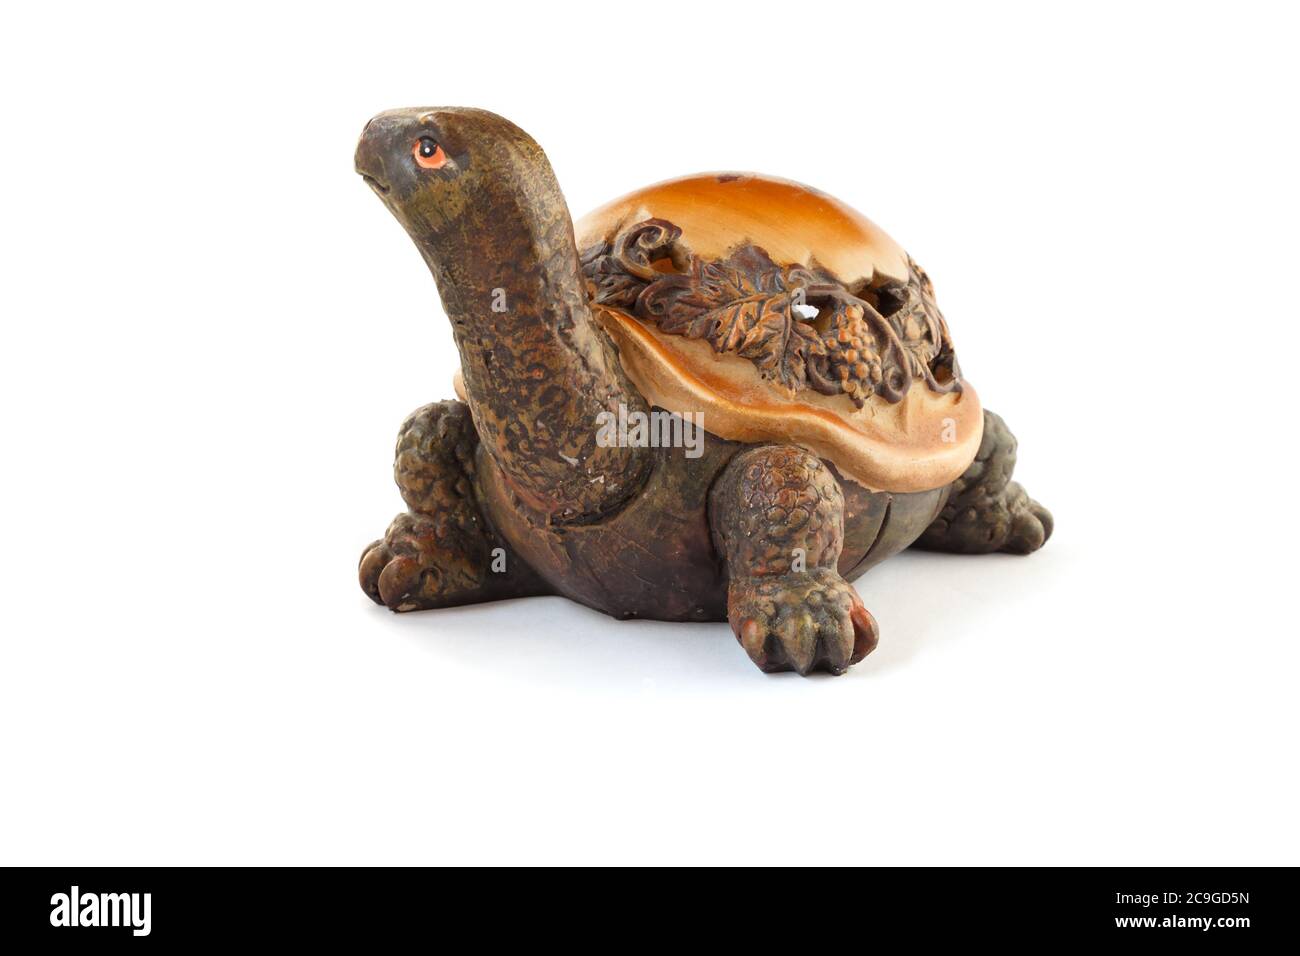 Wooden turtle figurine isolated on white background. Stock Photo